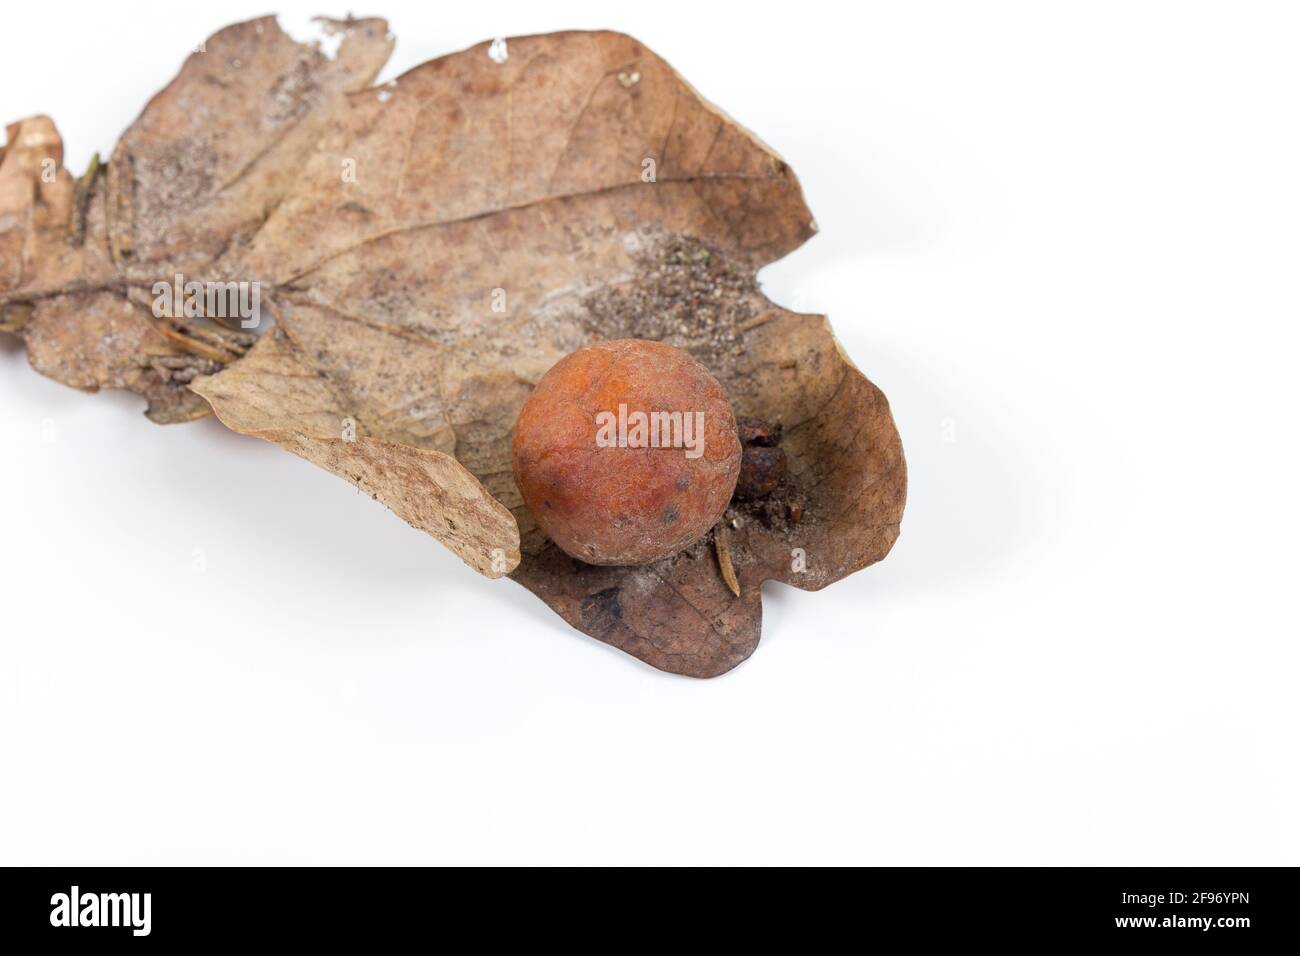 Oak apple or oak gall on a fallen dry leaf found in a forest in springtime isolated on white background. Tree infection. Closeup. Stock Photo